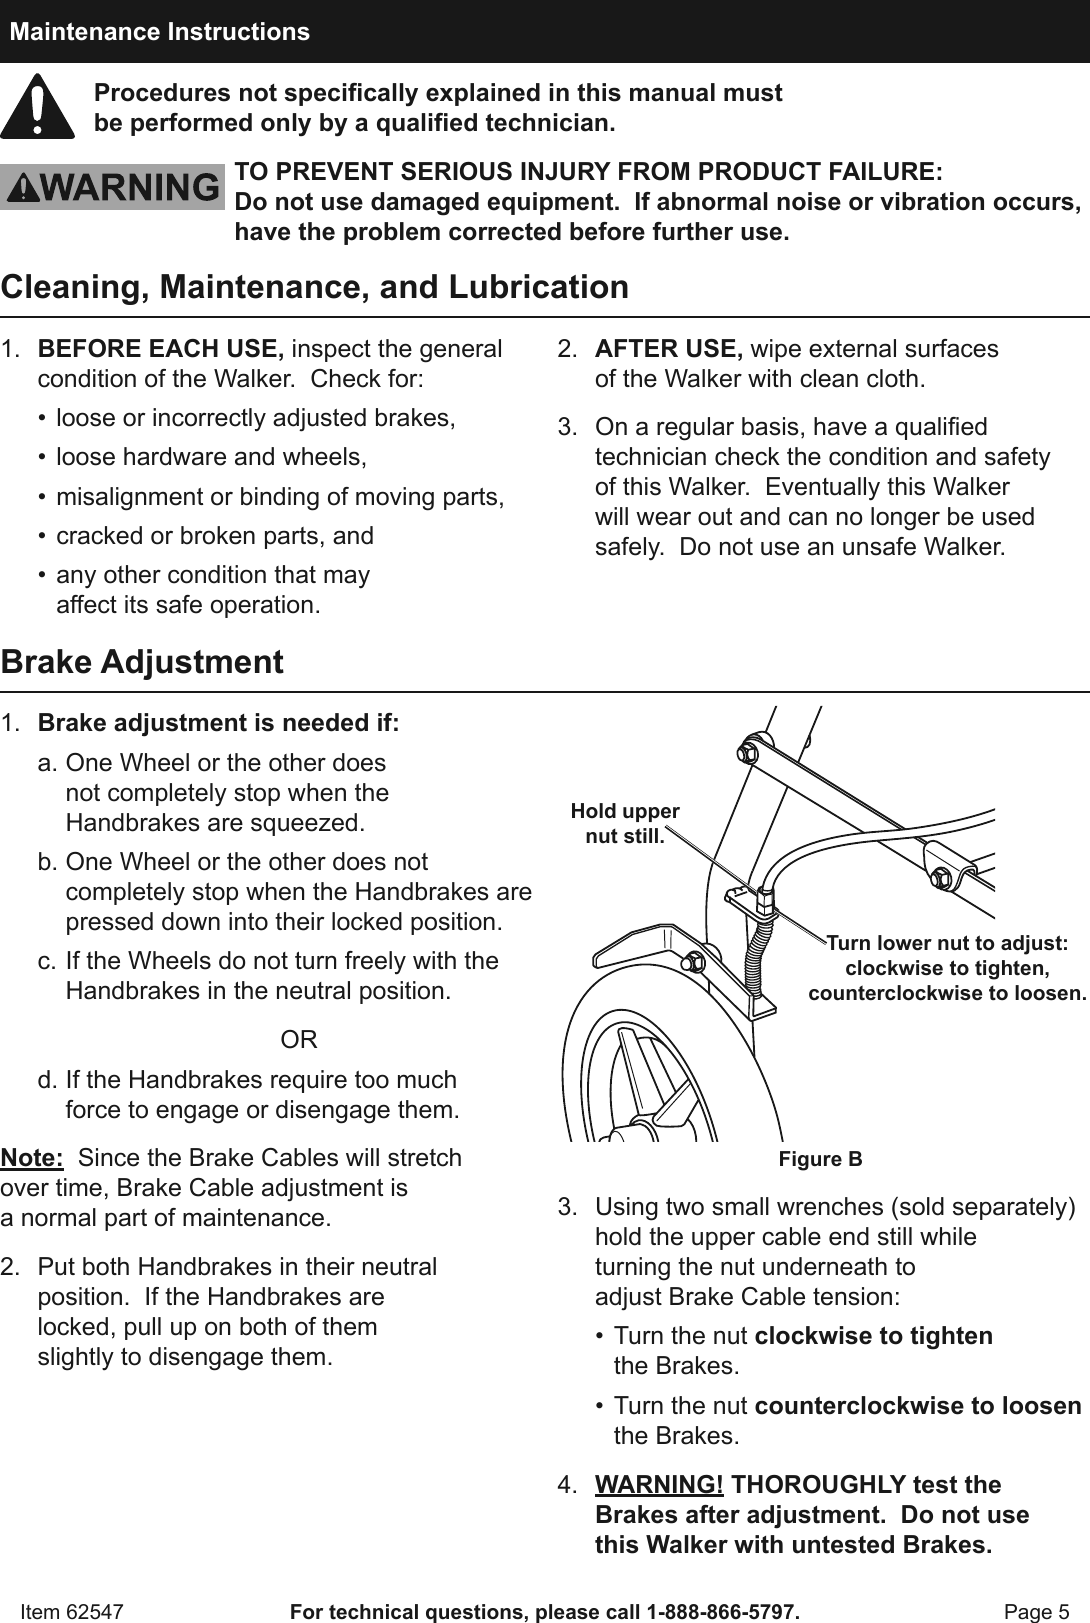 Page 5 of 8 - Manual For The 62547 Sit-or-Stand Behind Rolling Walker